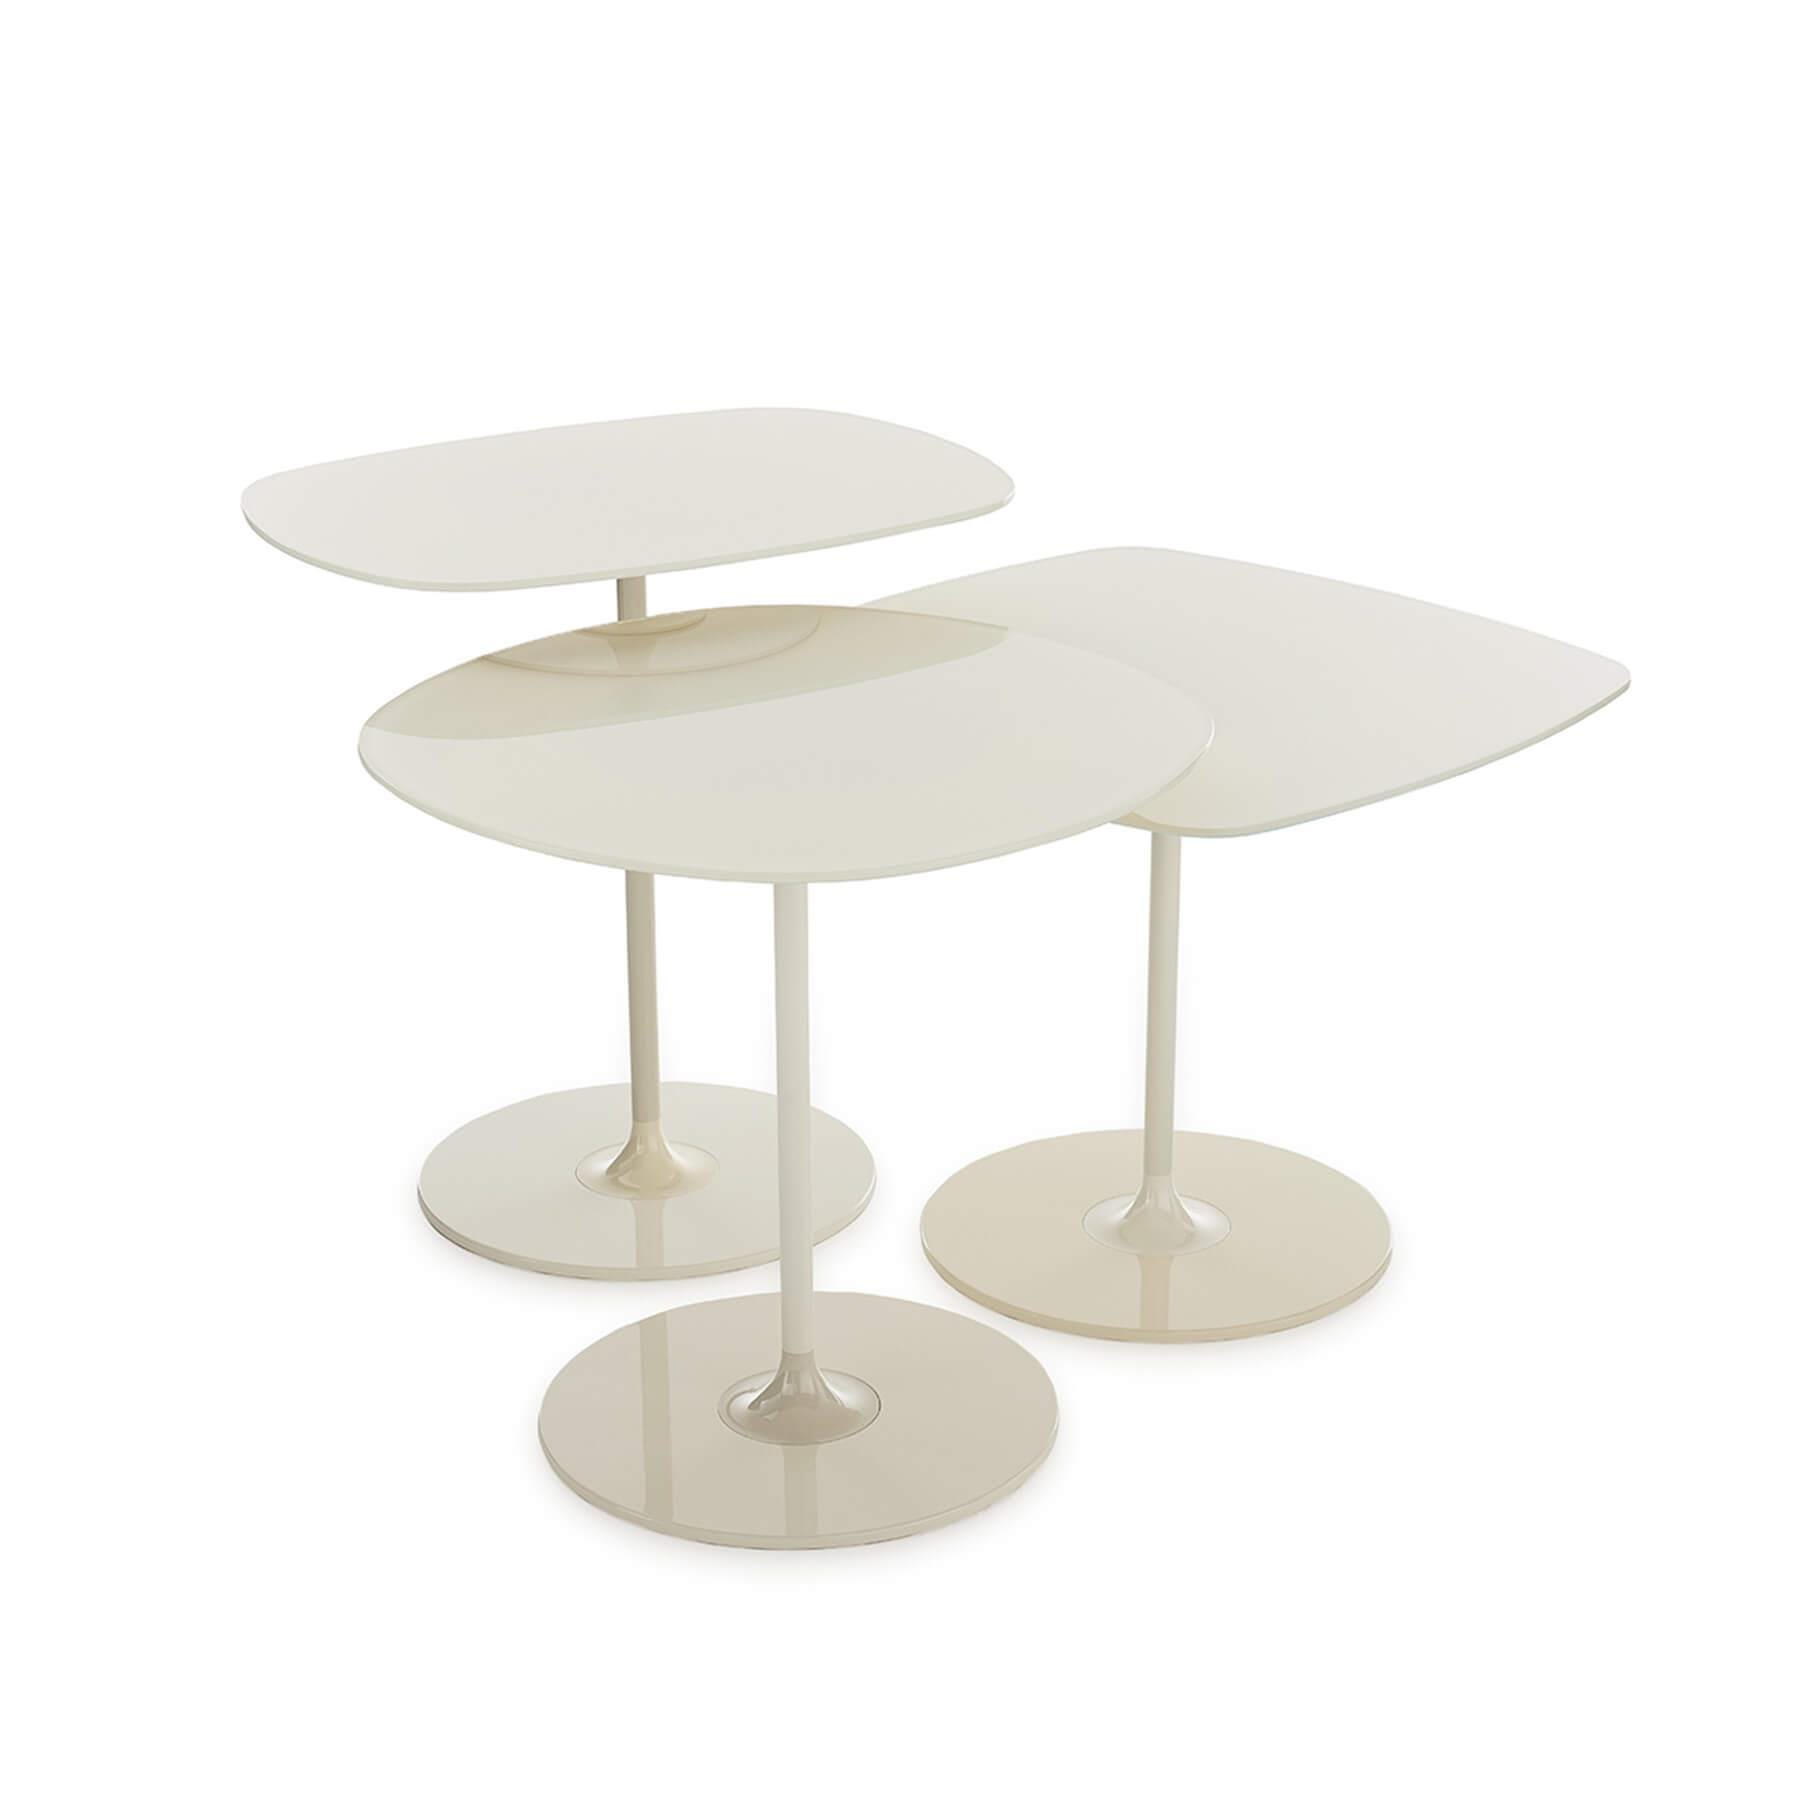 Kartell Thierry Side Table Collection Warm Beige White Cream Designer Furniture From Holloways Of Ludlow